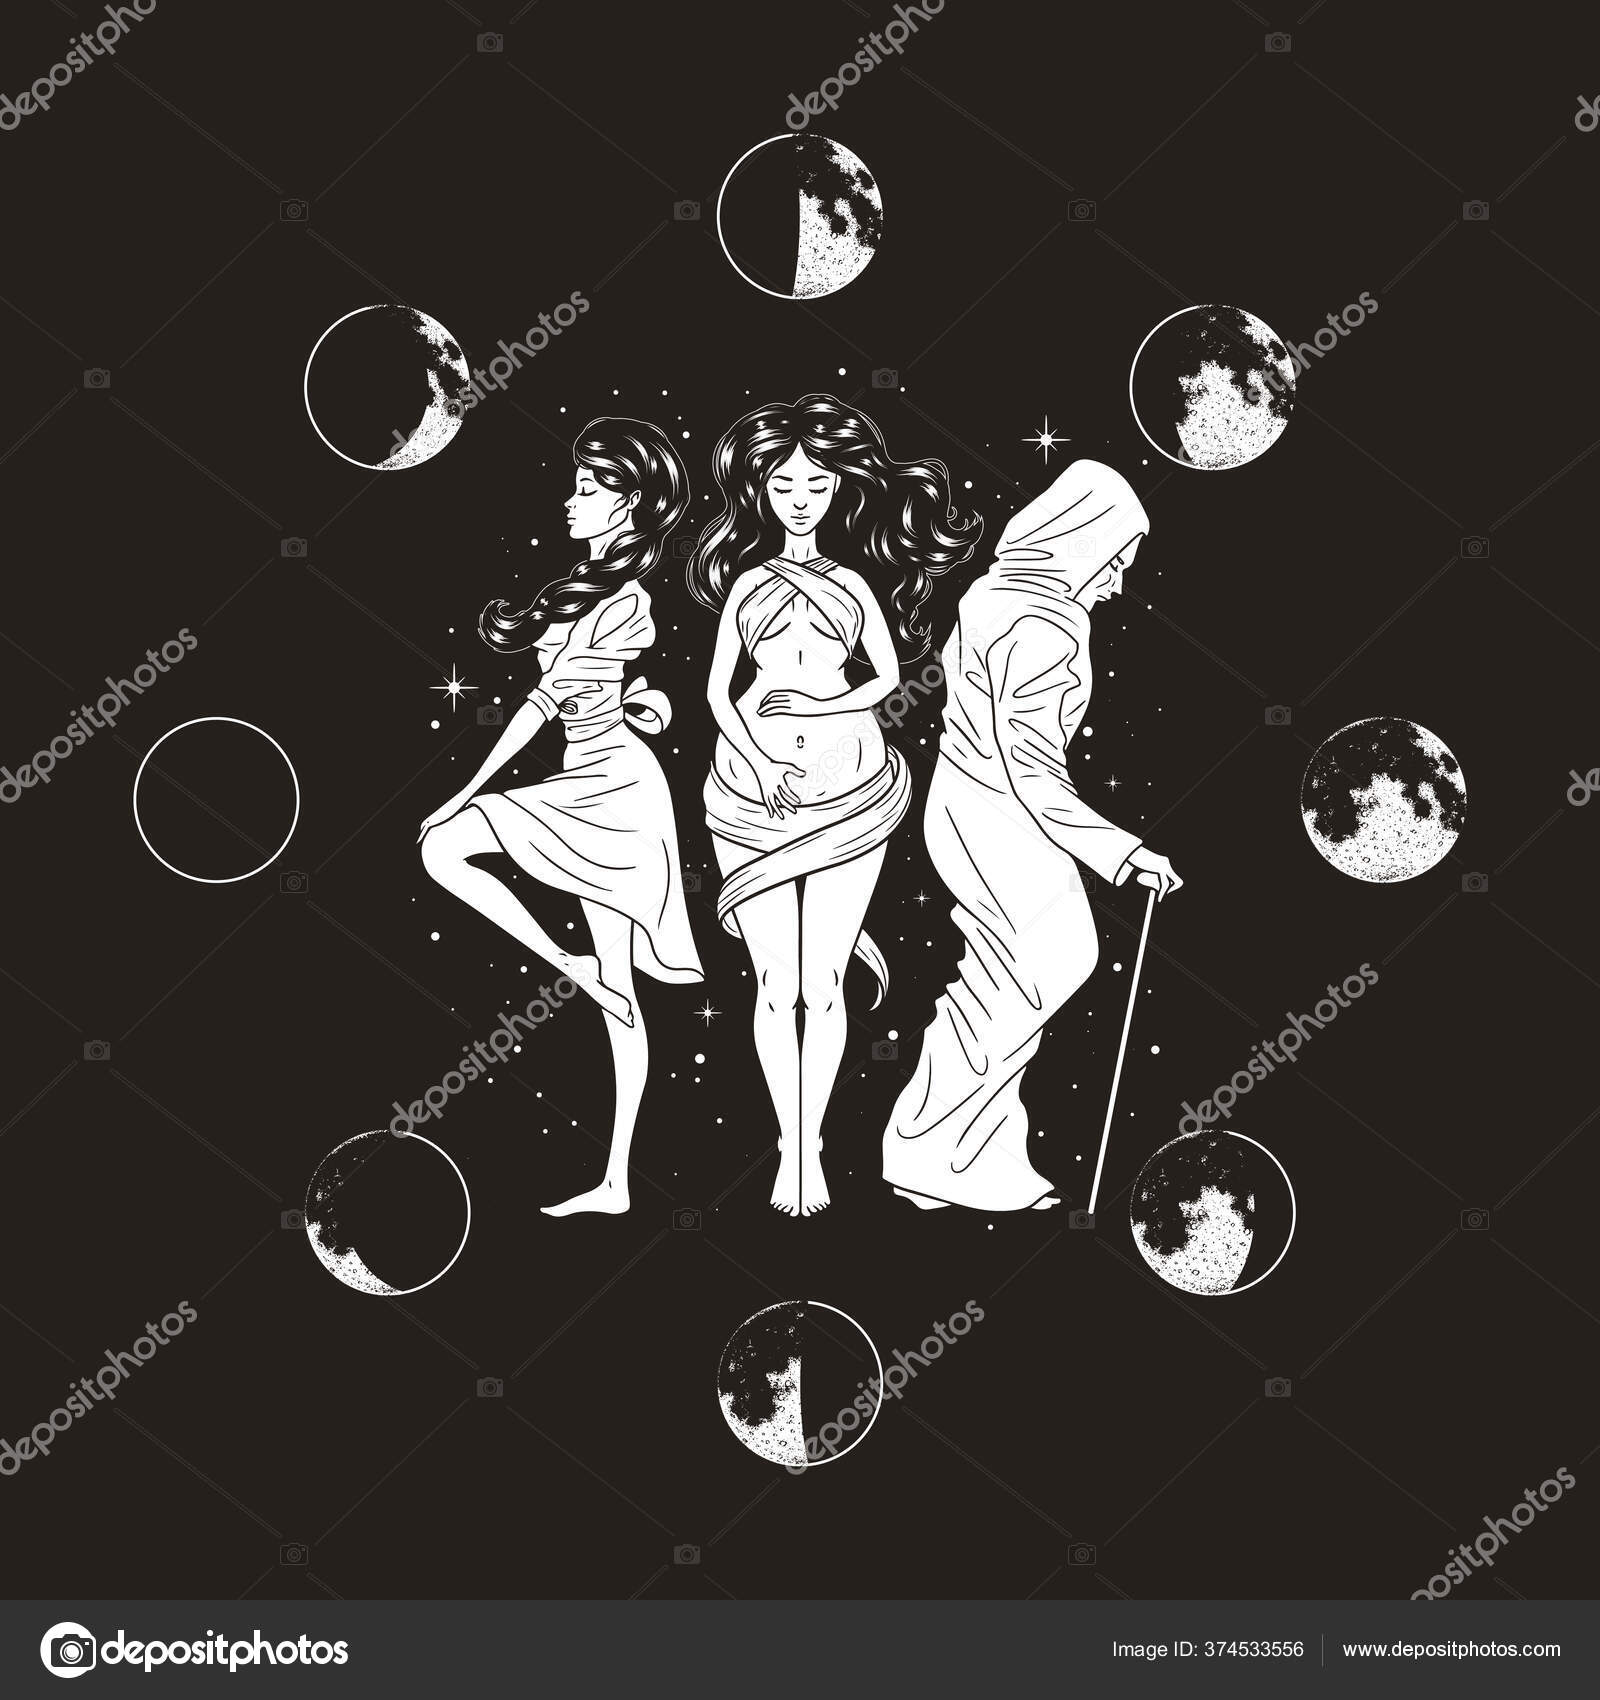 Hecate Images Browse 834 Stock Photos  Vectors Free Download with Trial   Shutterstock